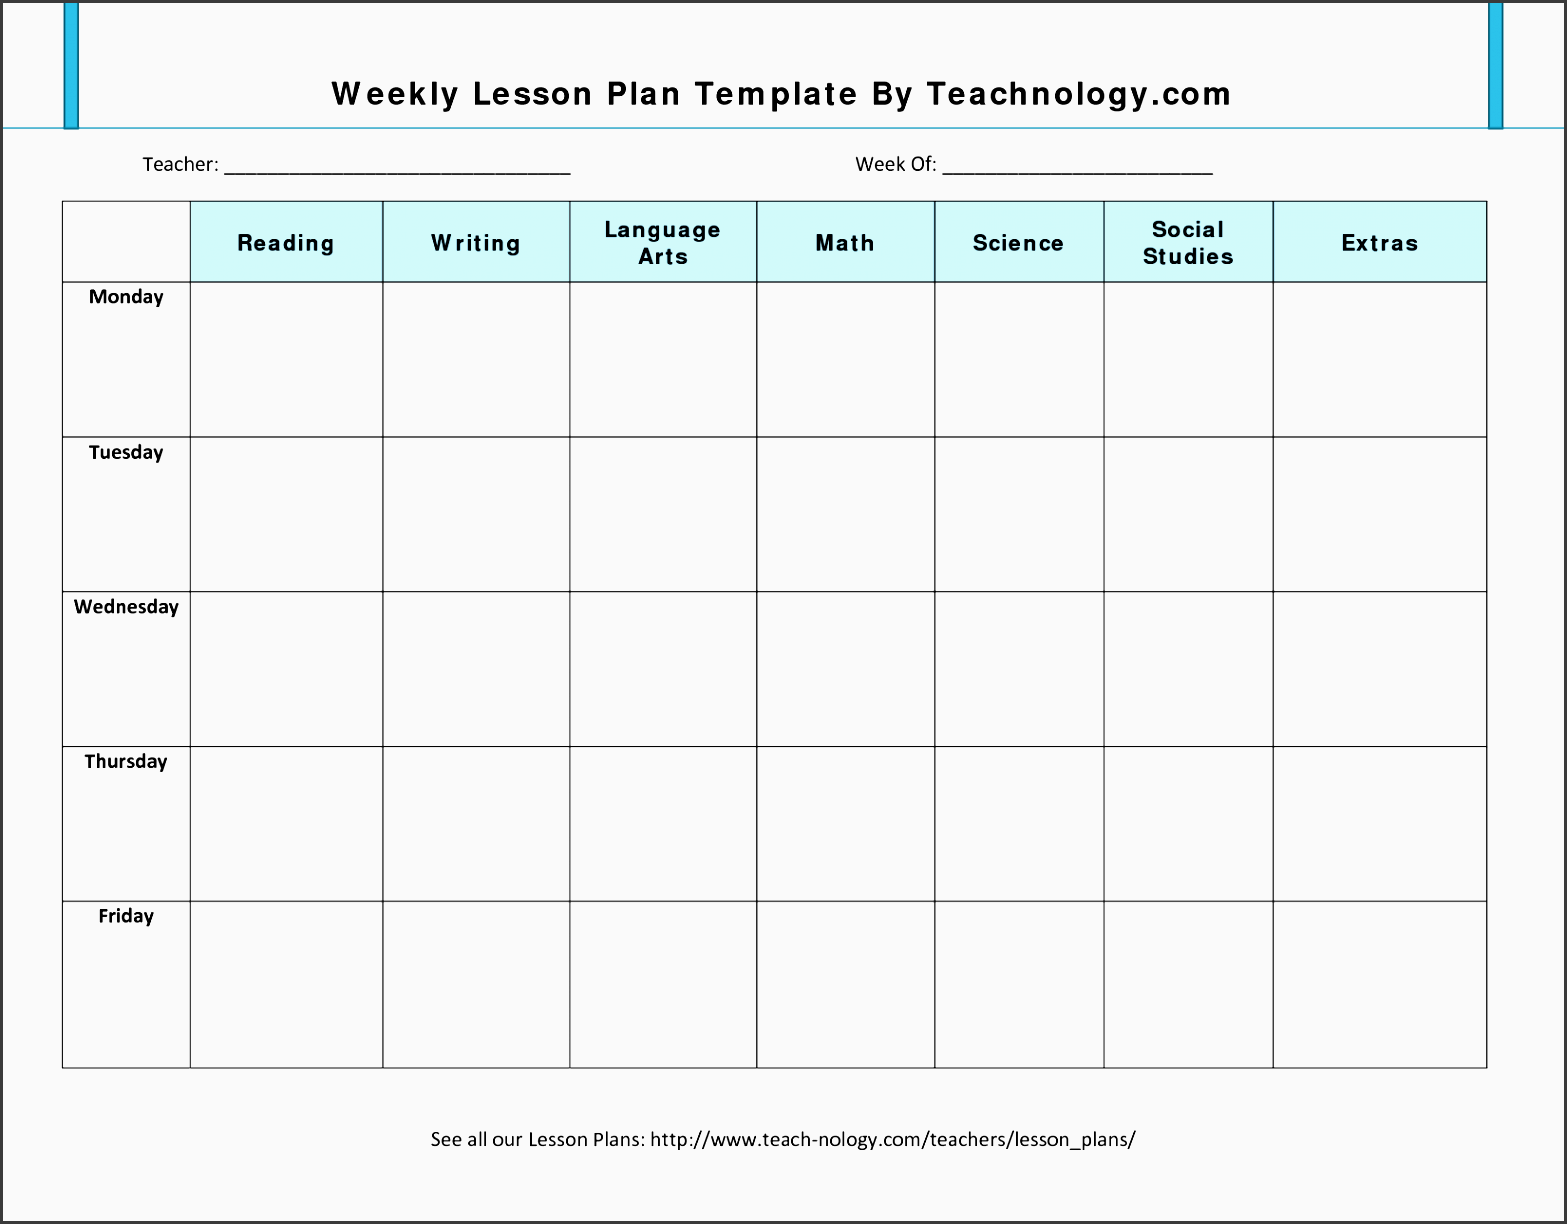 lesson plan format 7 weekly lesson plan template for teachers jsgts5gk